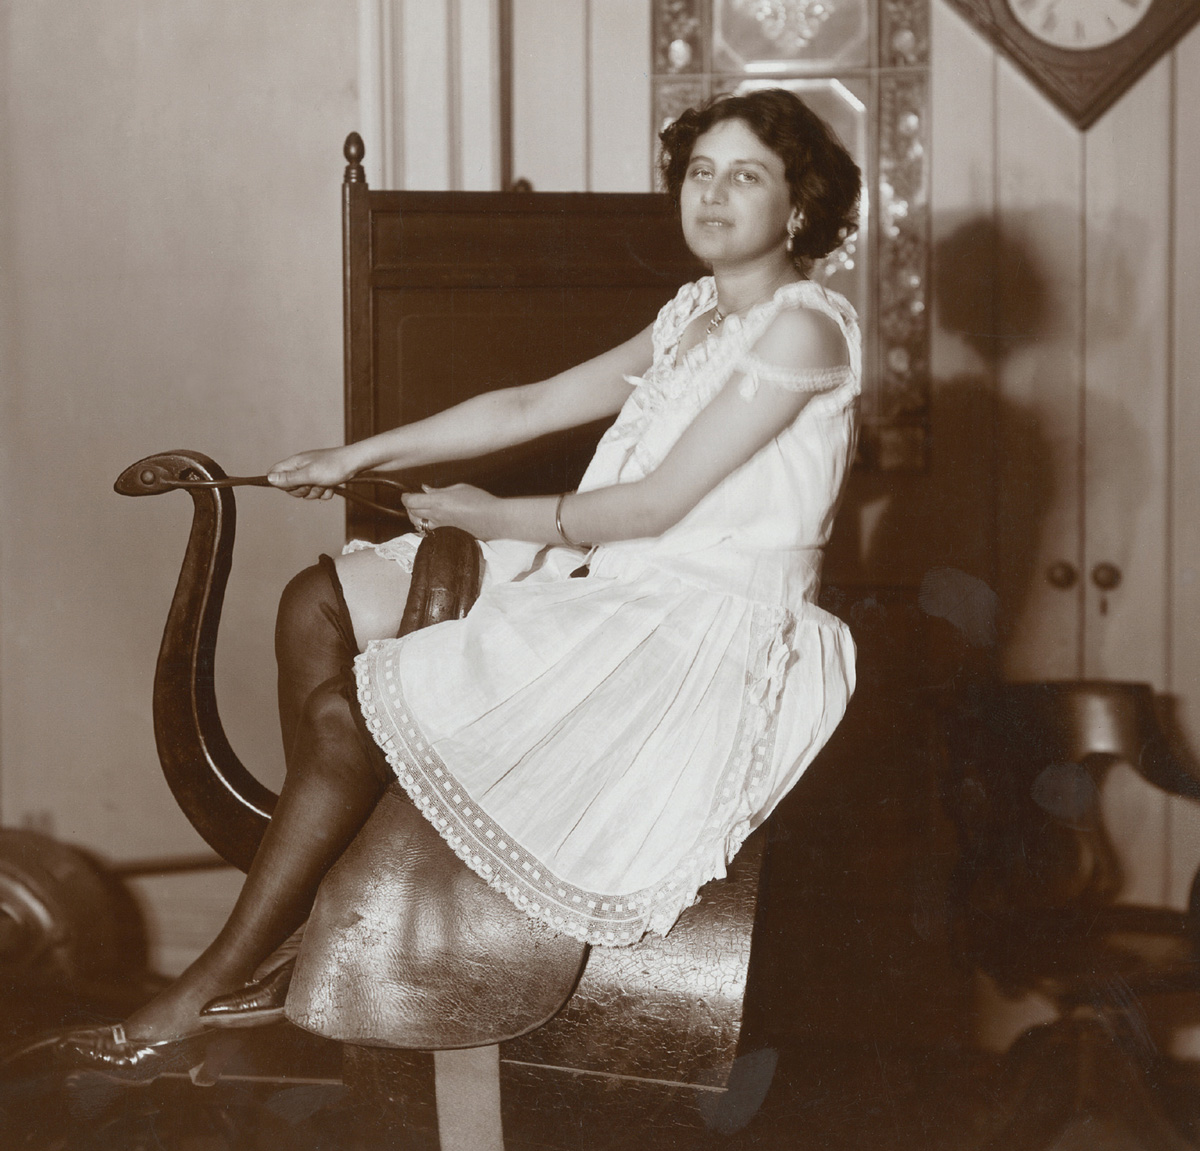 A woman poses on a horse riding simulator at the Zander Institute in New York in nineteen oh eight.